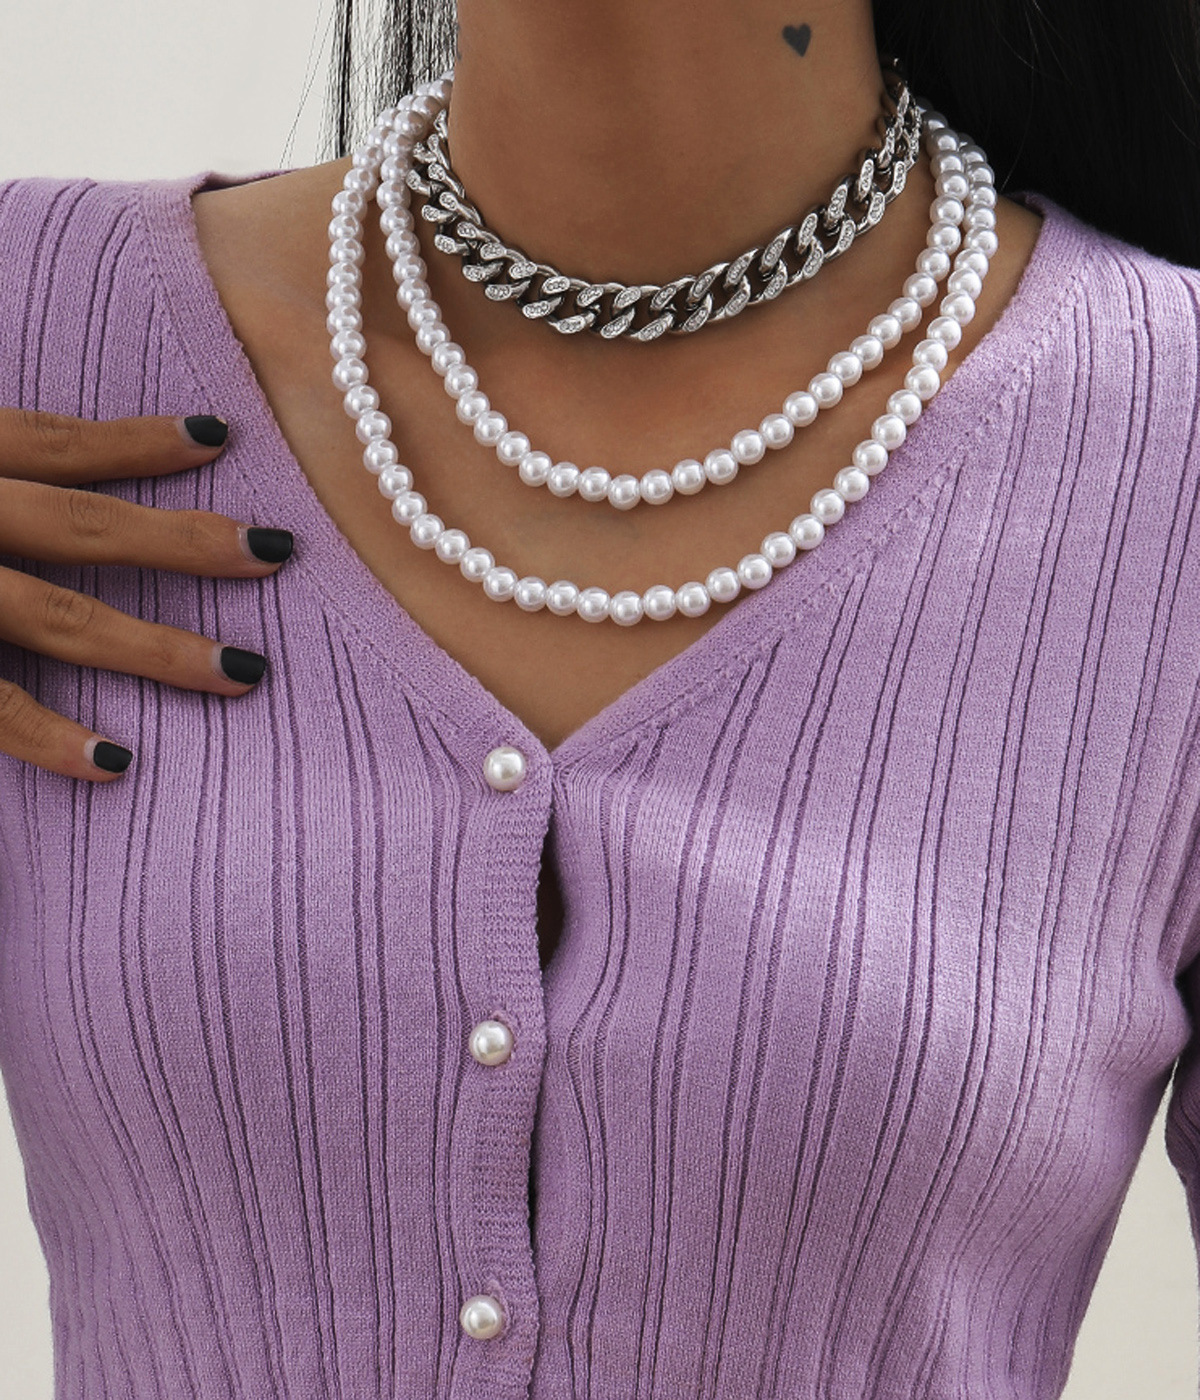 X01386 2pcs Rhinestone Thick Chain Choker Double Layered Faux Pearl Beaded Necklace